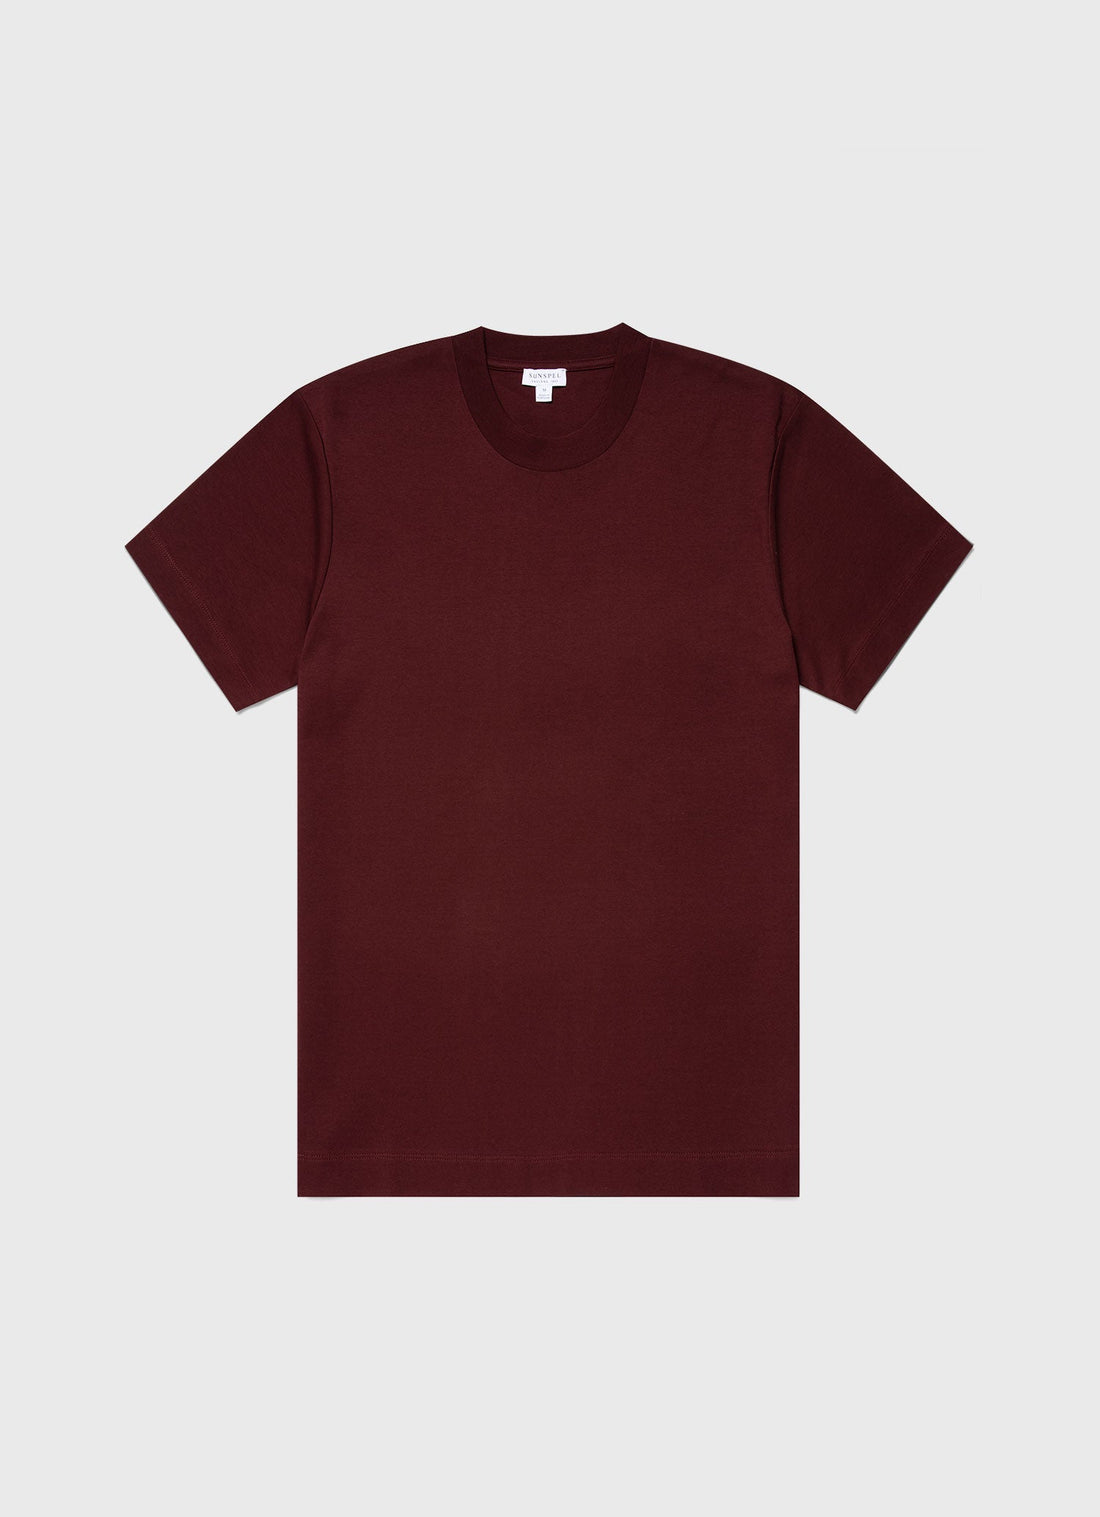 Men's Brushed Cotton T-shirt in Maroon